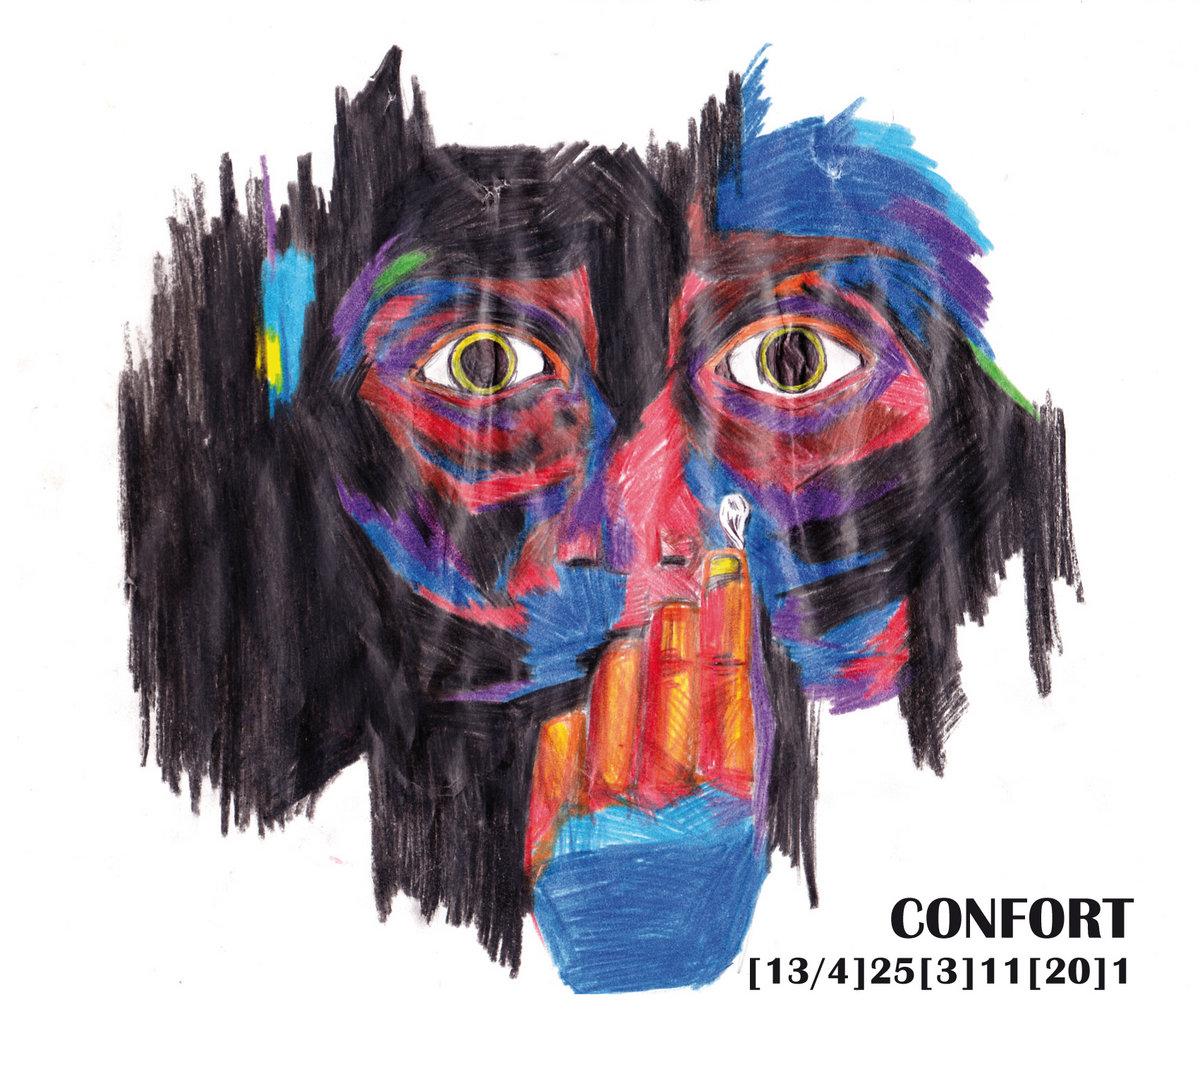 Confort cover